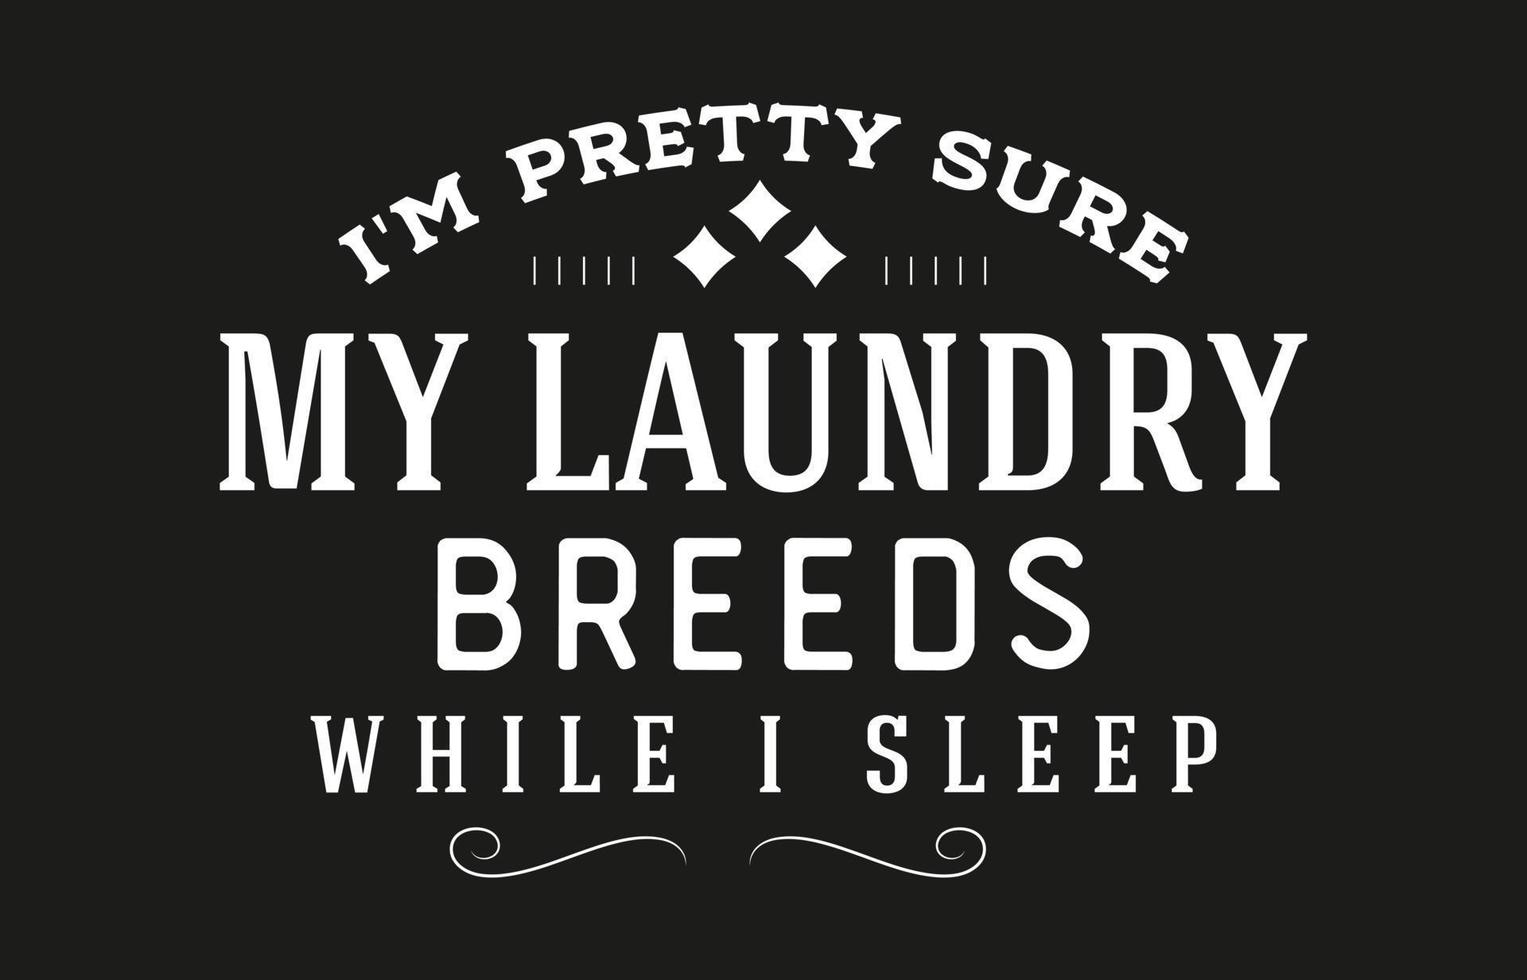 Vintage laundry sign symbols vector illustration isolated. Laundry service room label, tag, poster design for shop. i'm pretty sure my laundry breeds while i sleep